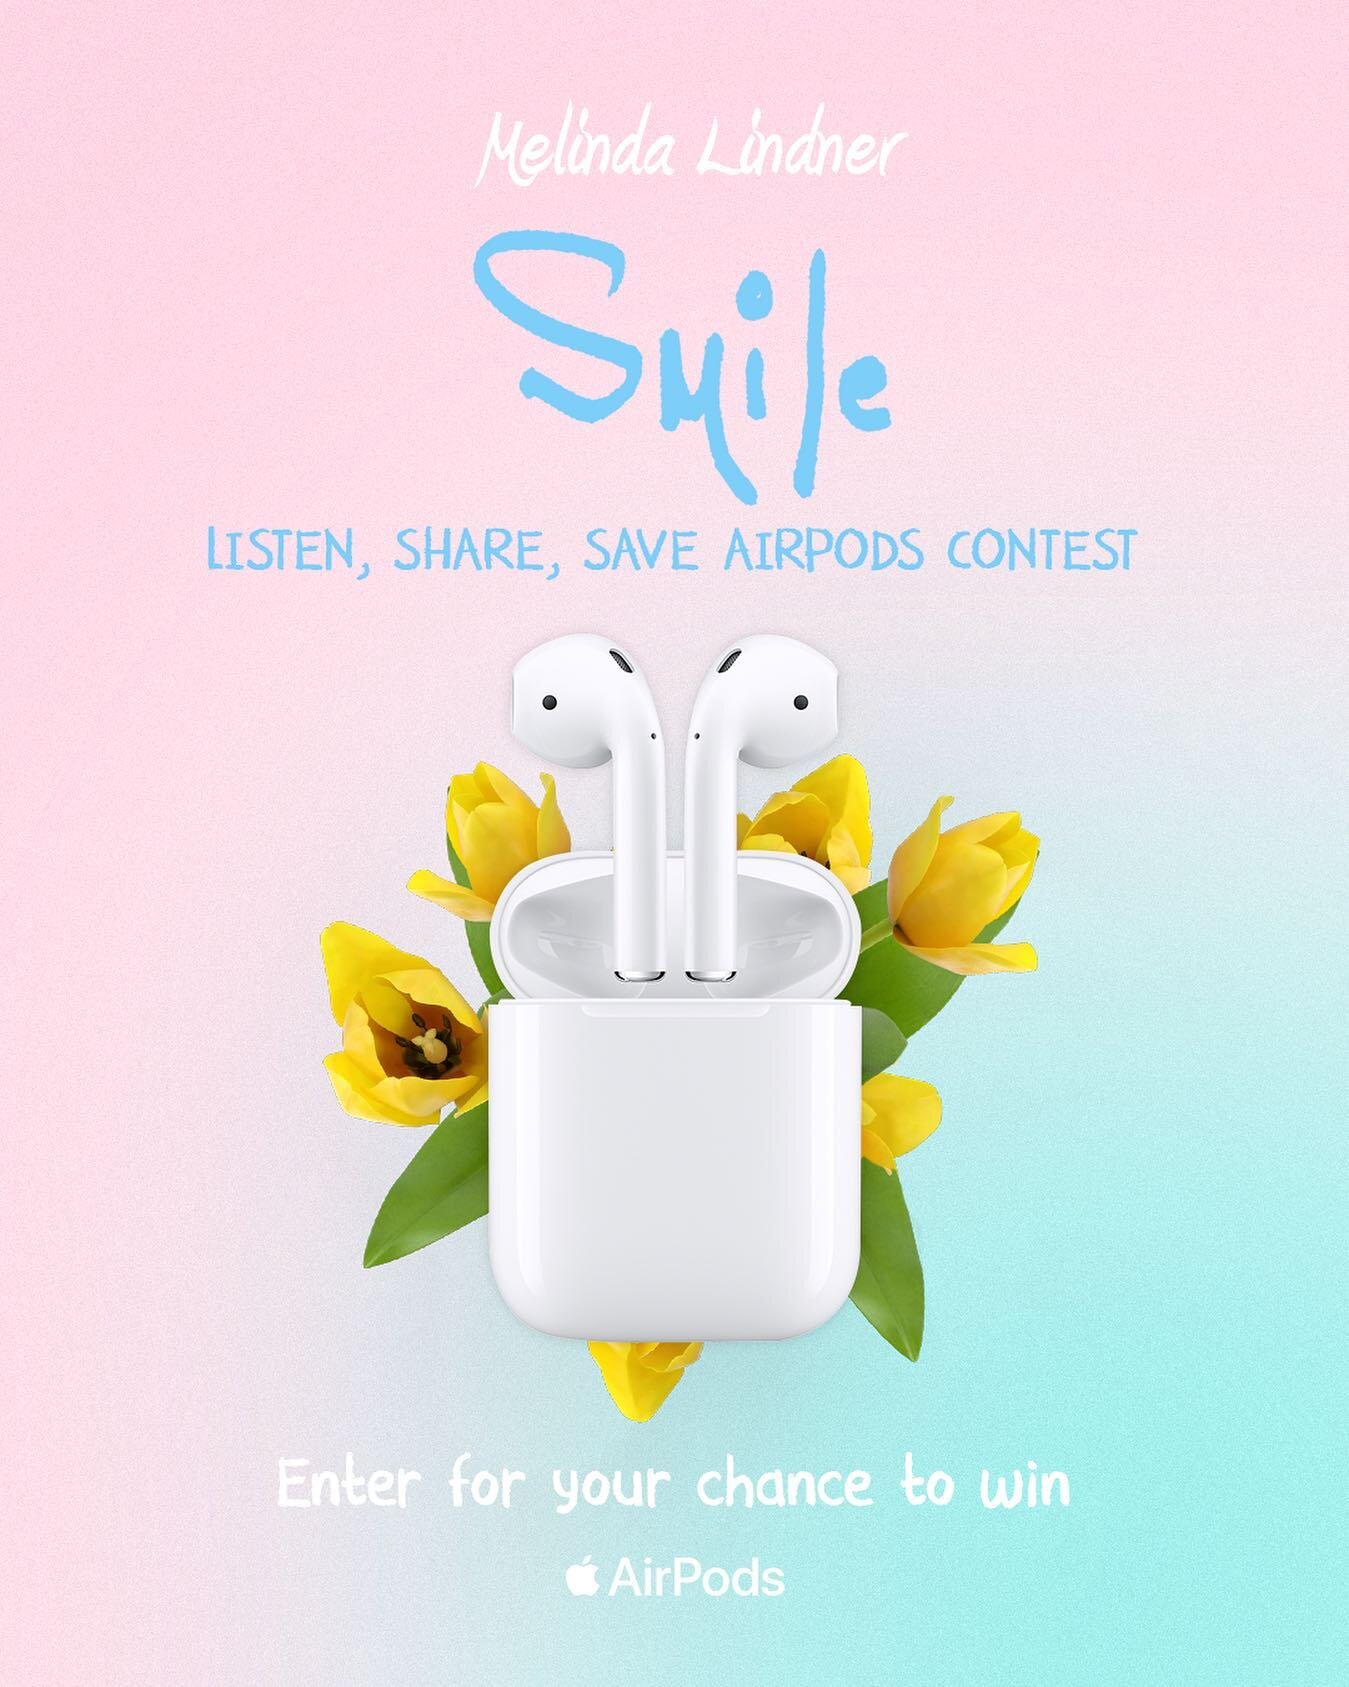 Smile into Spring with me and enter for your chance to win airpods when you stream #Smile! 🌷🌼 Click the link in my bio for more info!